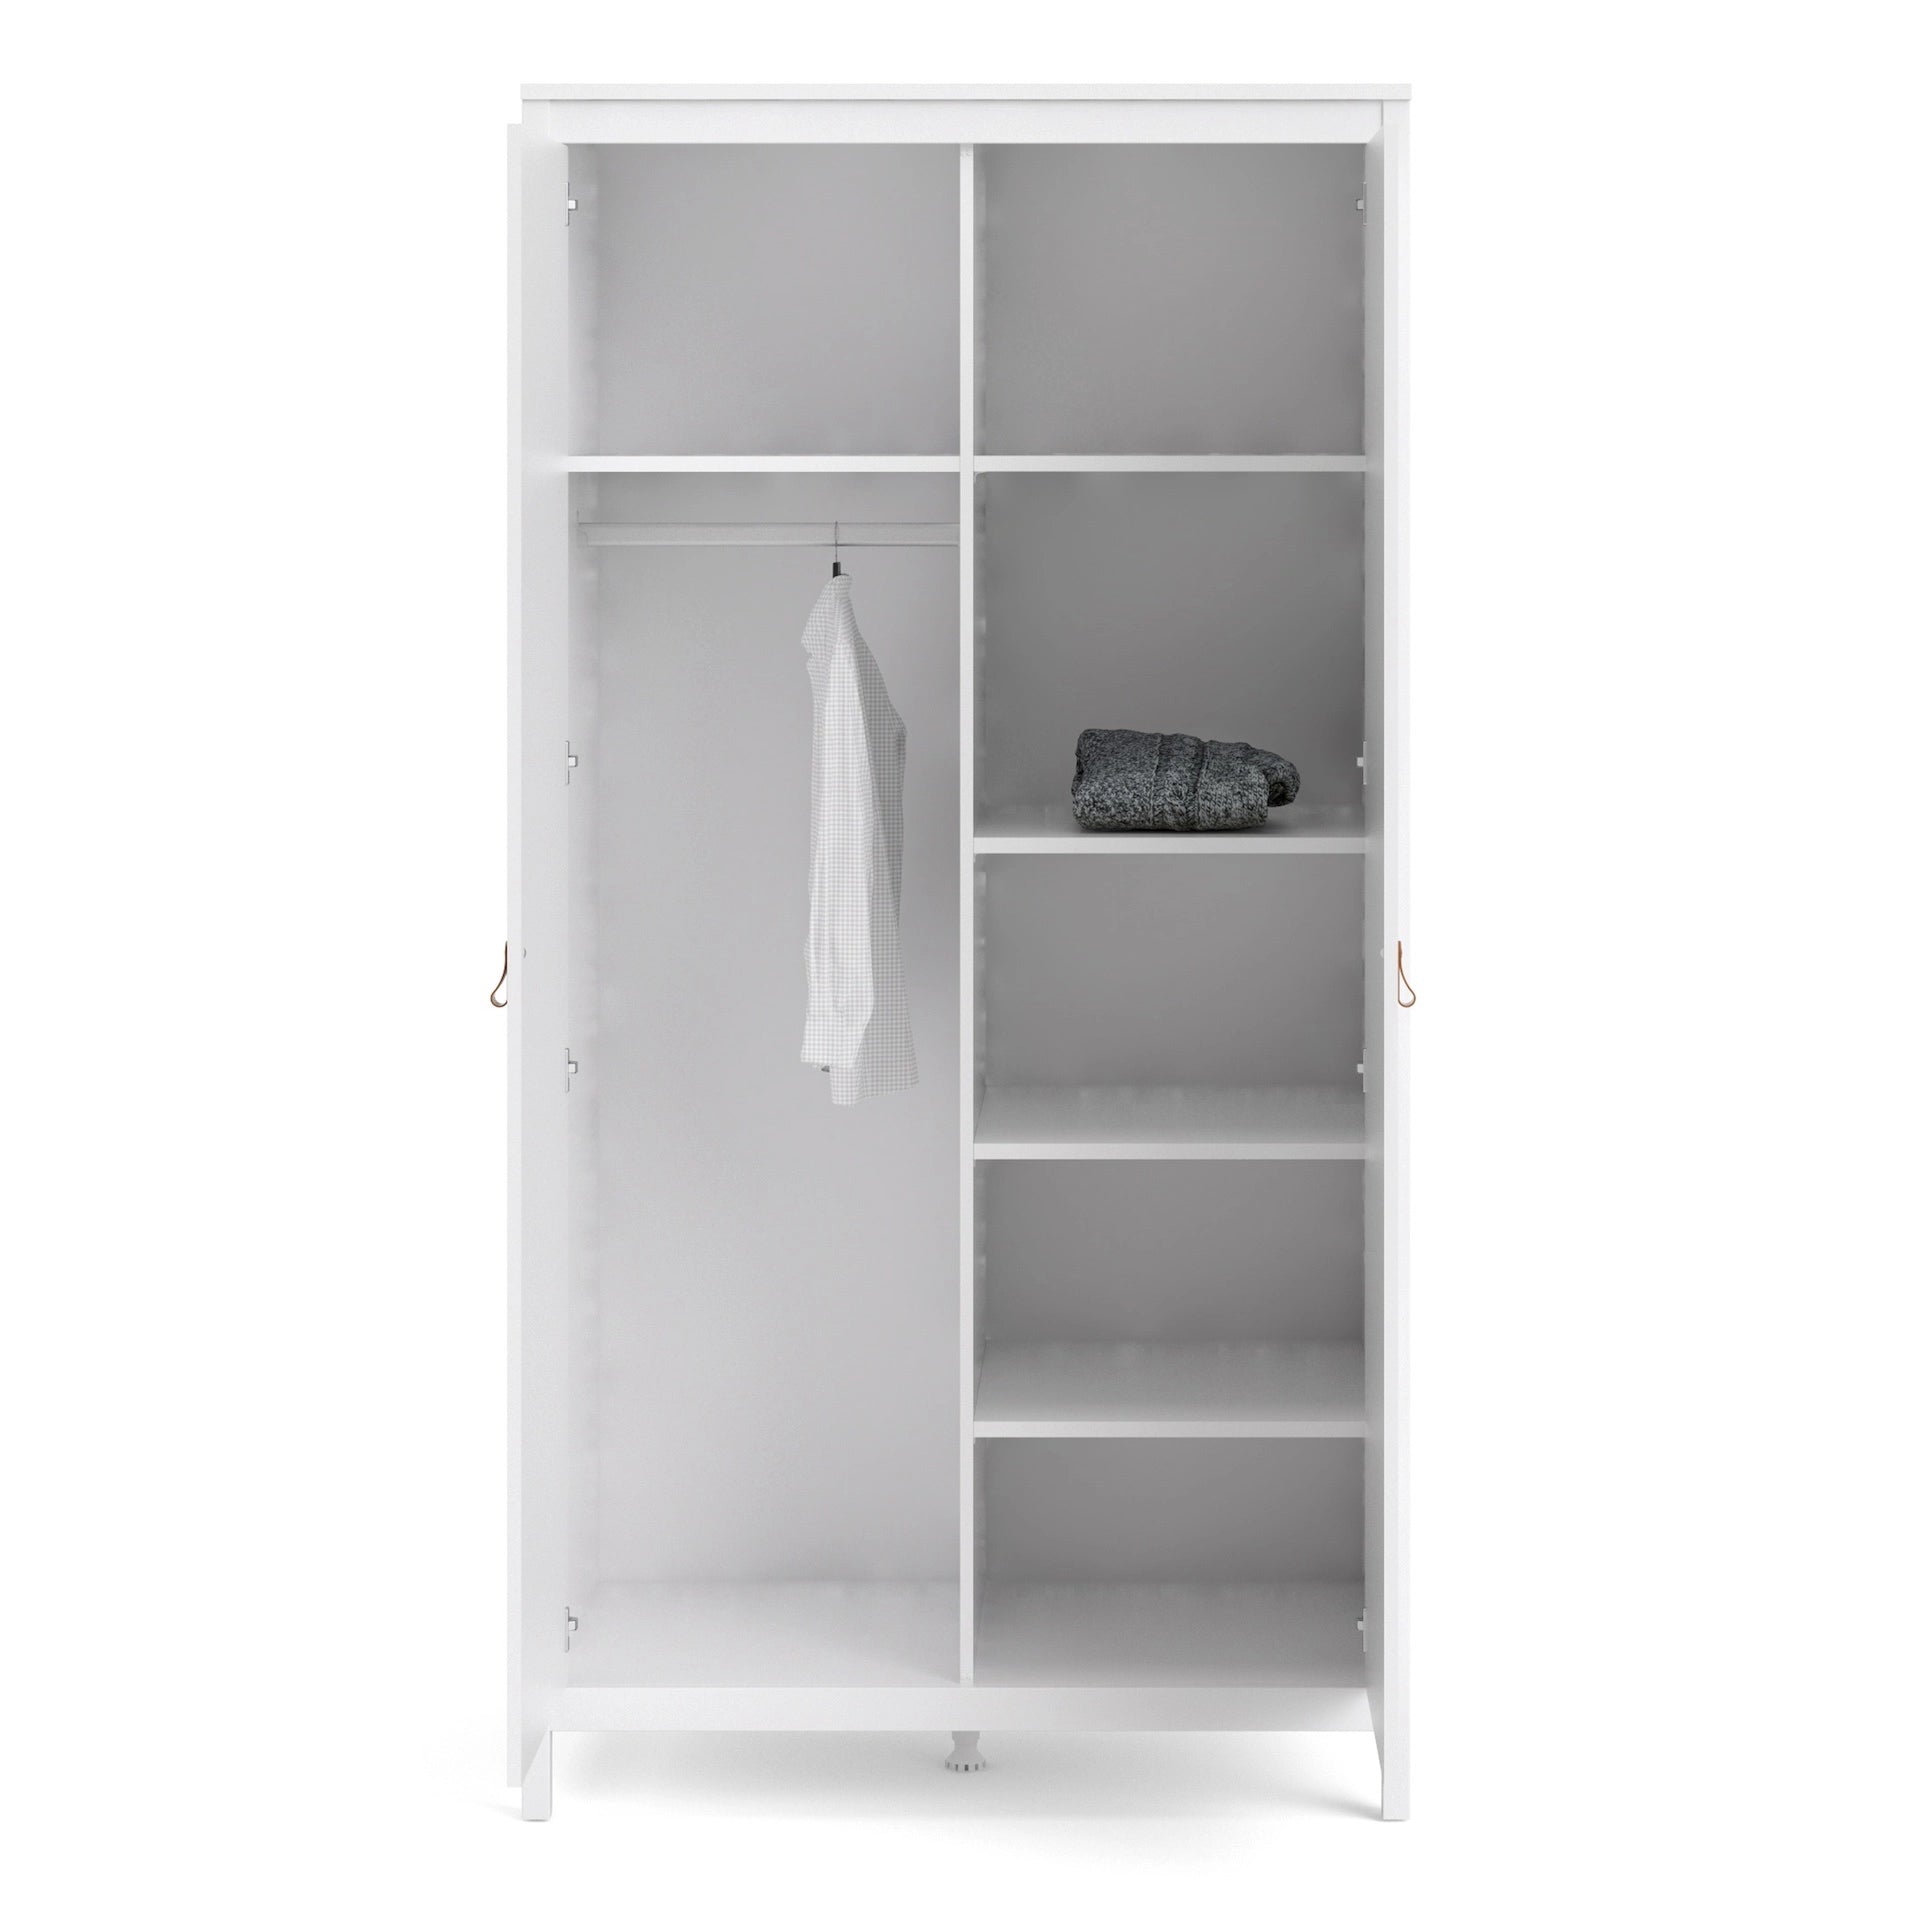 Furniture To Go Barcelona Wardrobe with 2 Doors in White